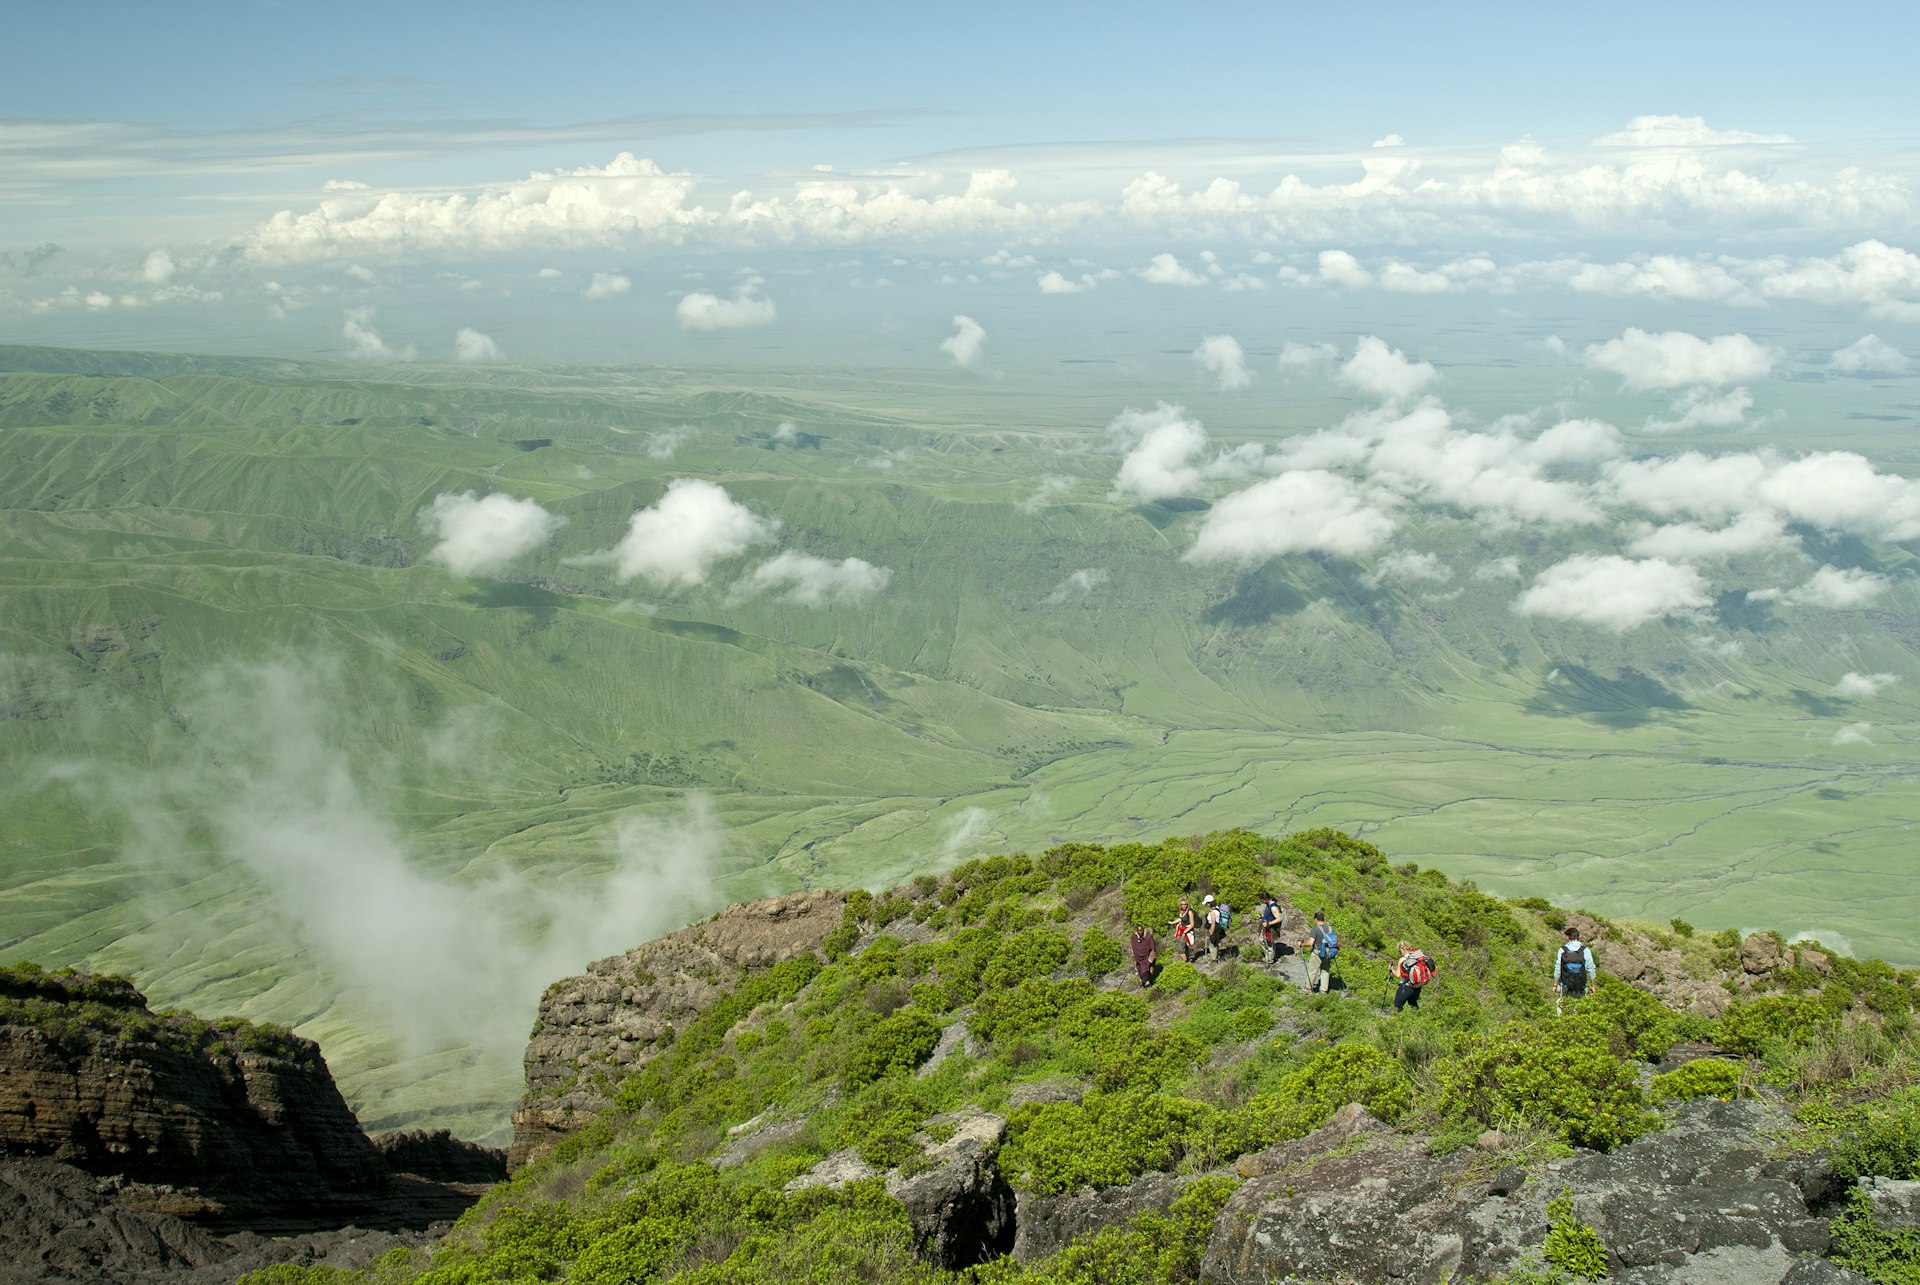 A group hiking down from the top of Ol Doinyo Lengai into the green Rift Valley. In the background the Escarpment of the Rift Valley is visible. In the foreground there is some volcanic smoke coming out of a crack. 